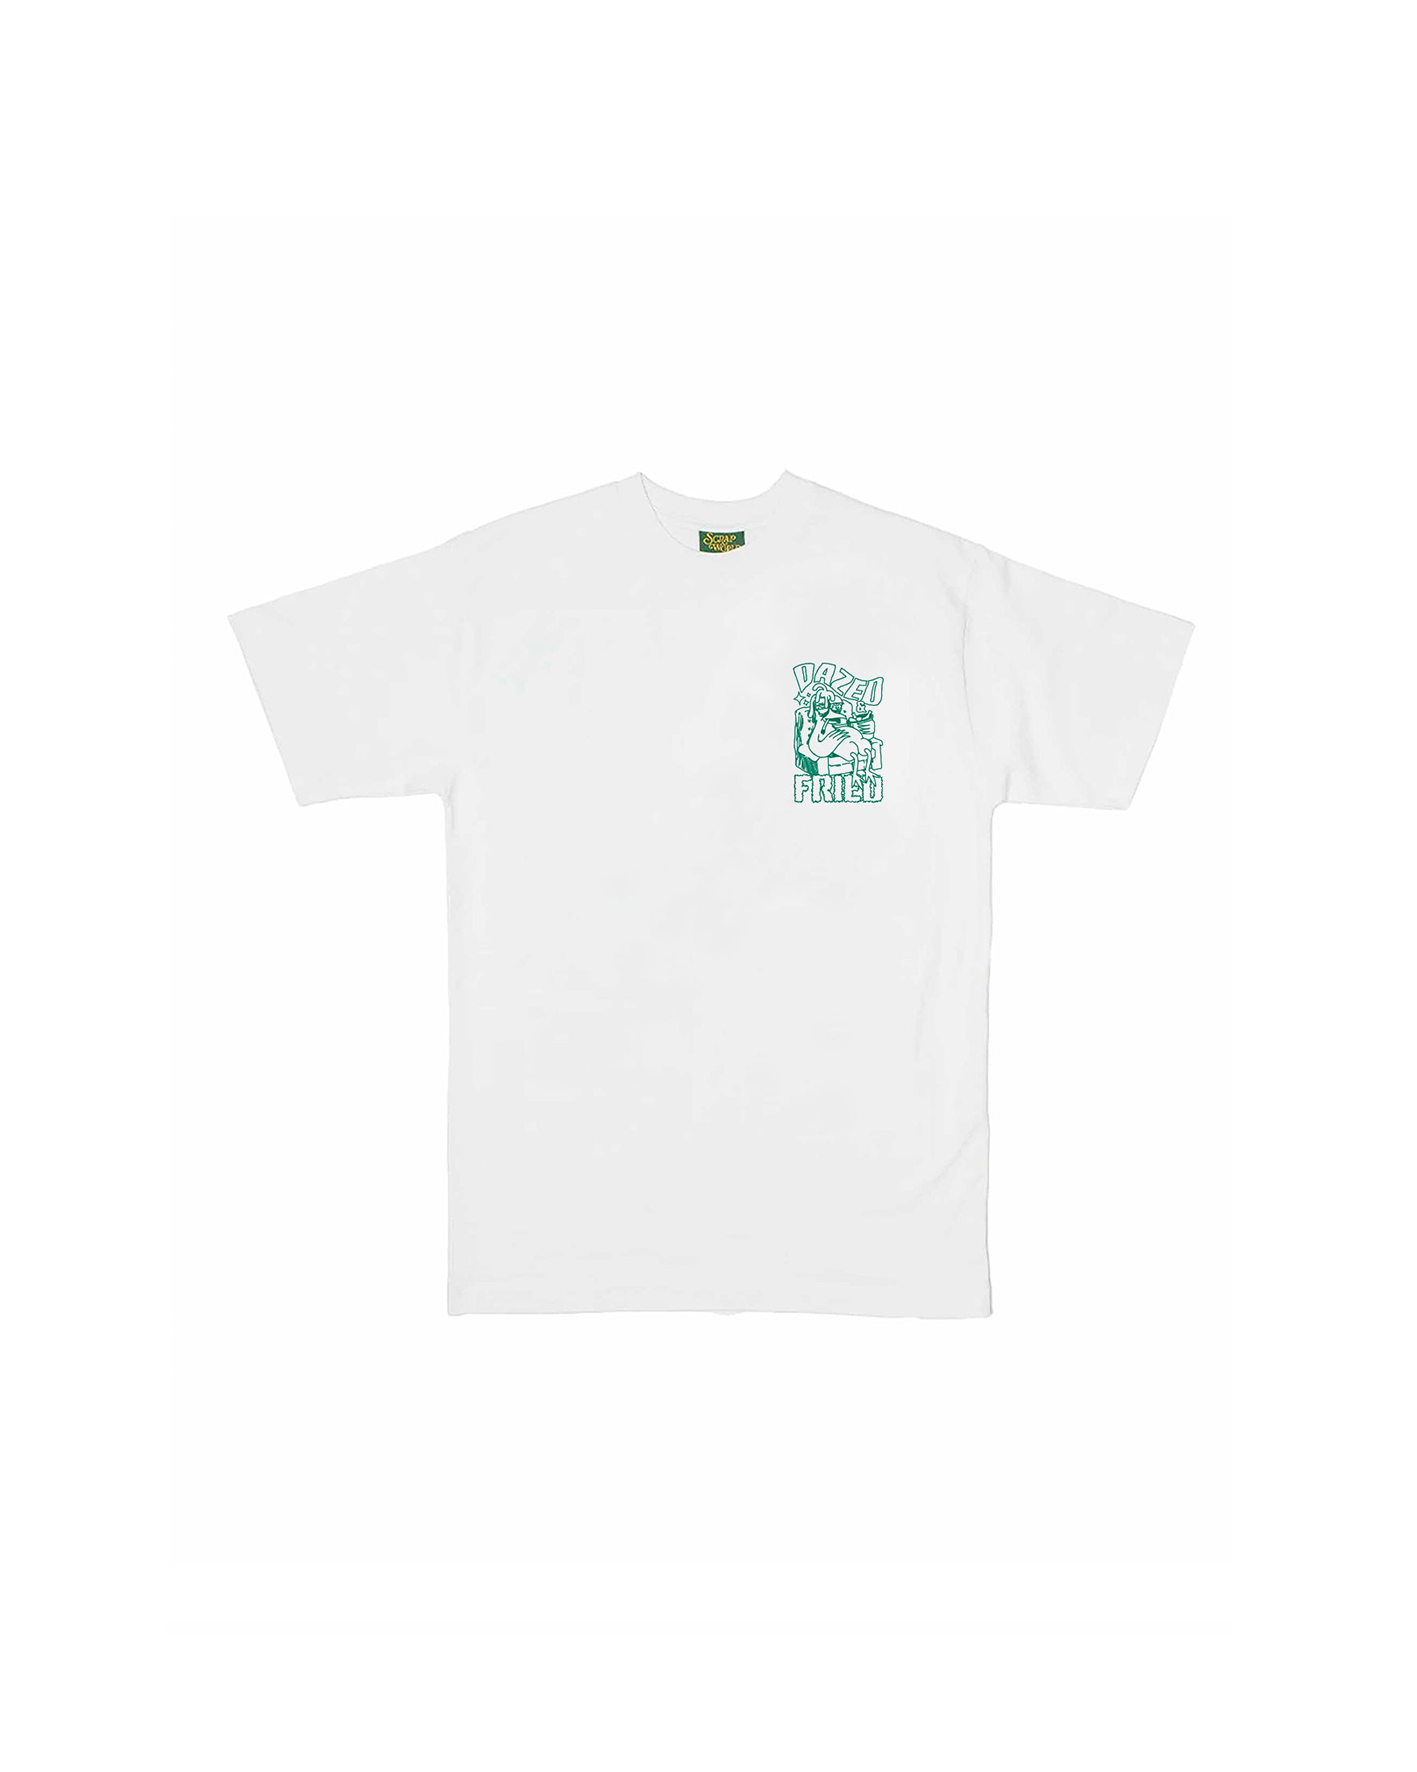 DAZED AND FRIED TEE WHITE